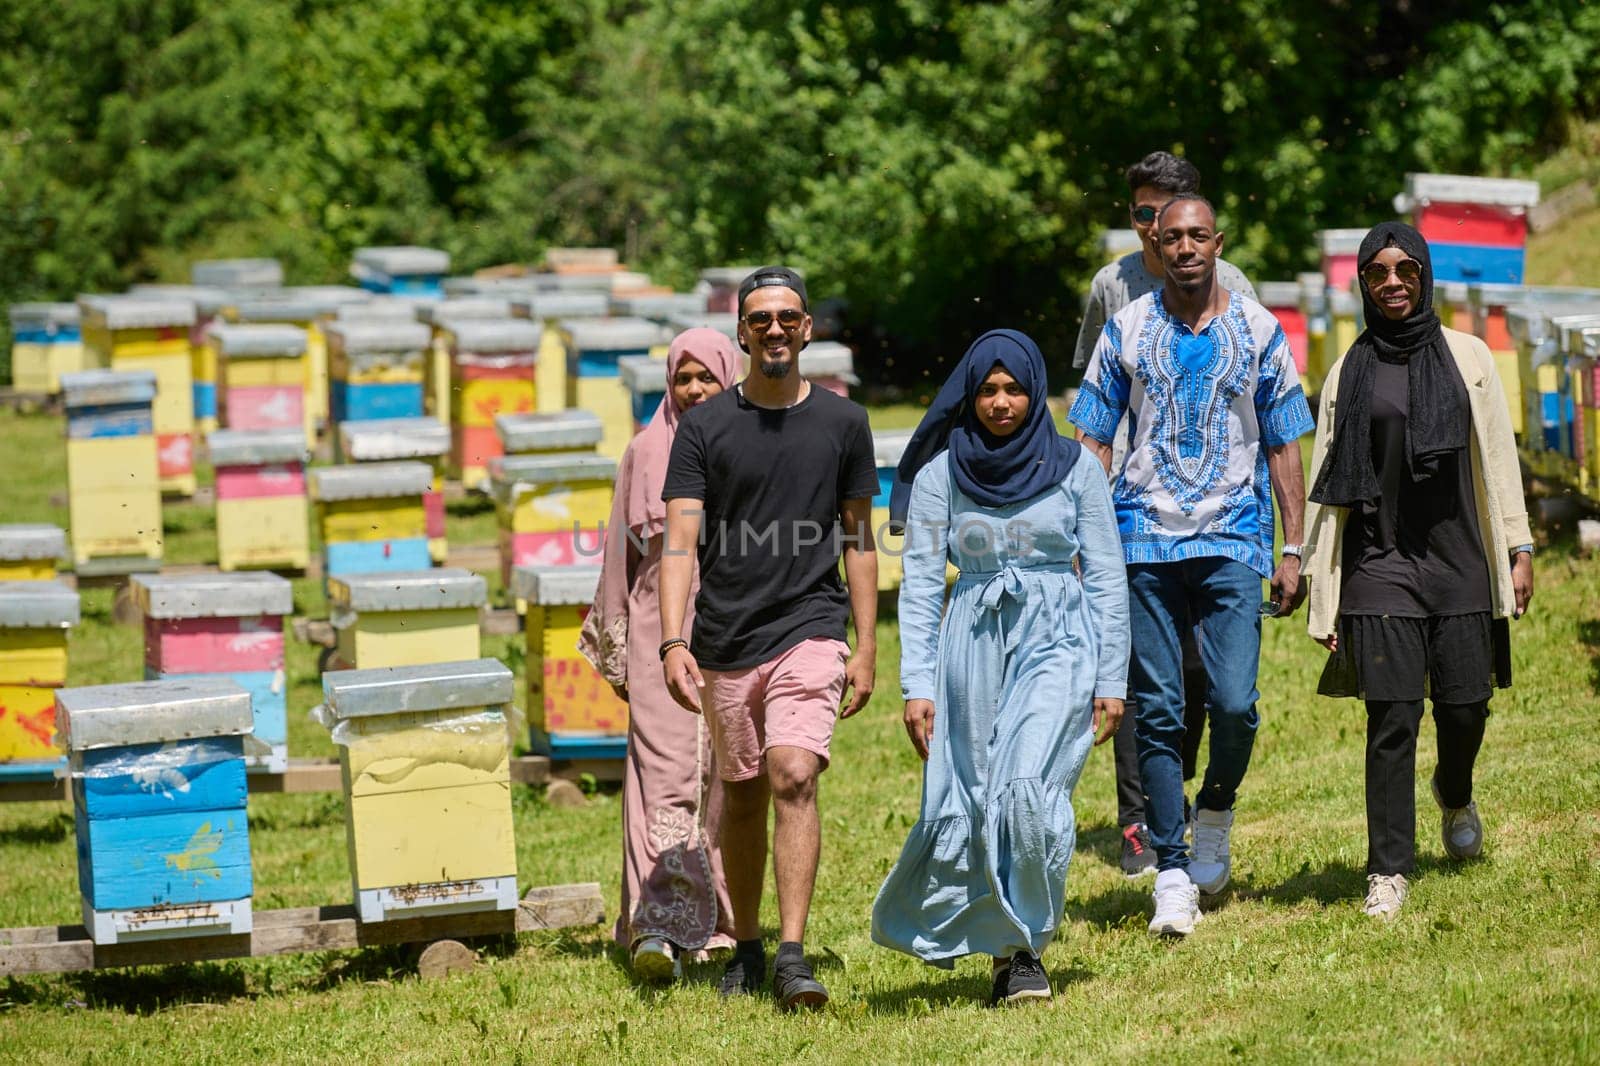 A diverse group of young friends and entrepreneurs explore small honey production businesses in the natural setting of the countryside. by dotshock